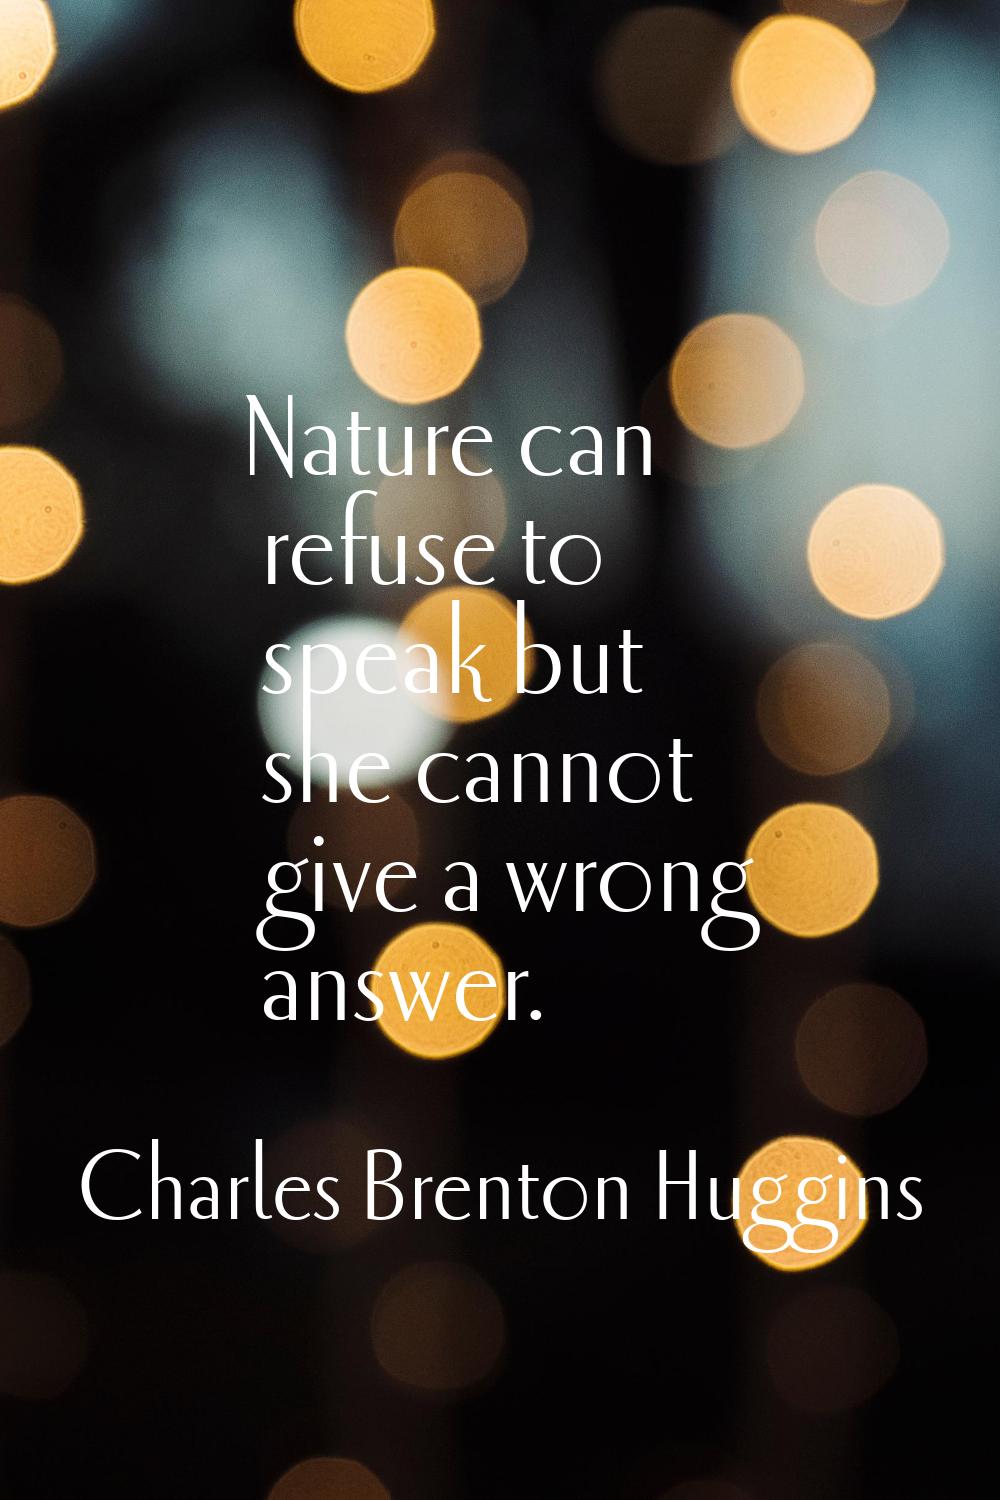 Nature can refuse to speak but she cannot give a wrong answer.